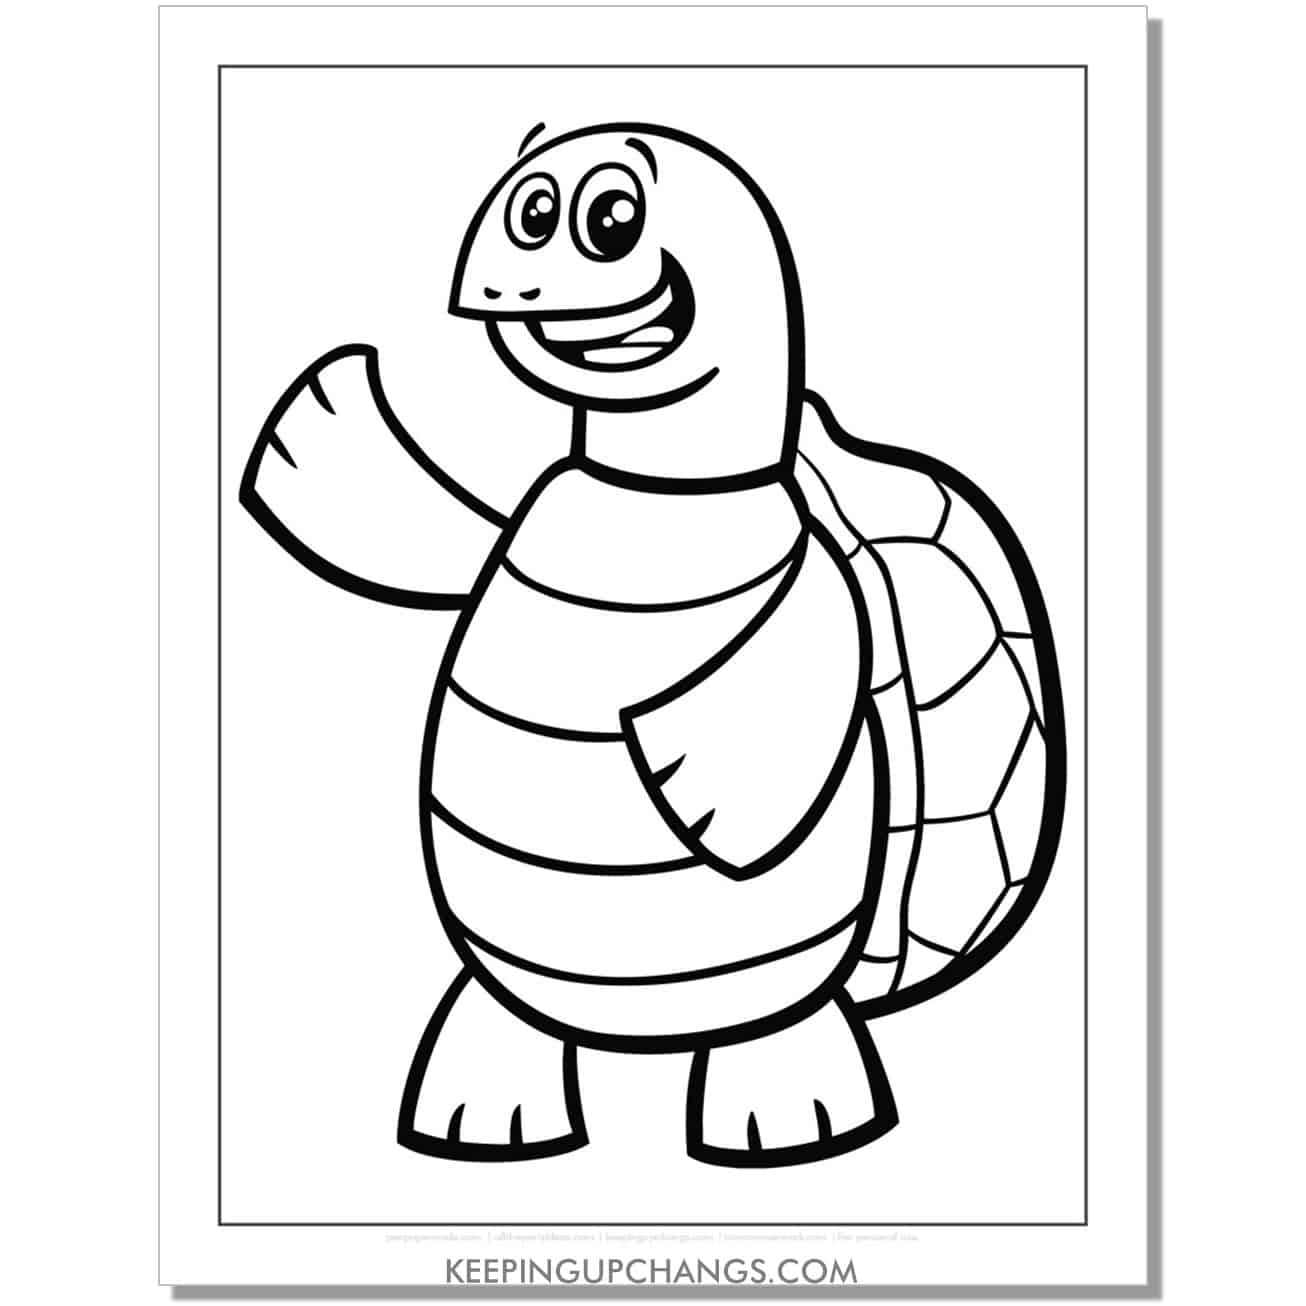 free standing cartoon turtle coloring page, sheet.